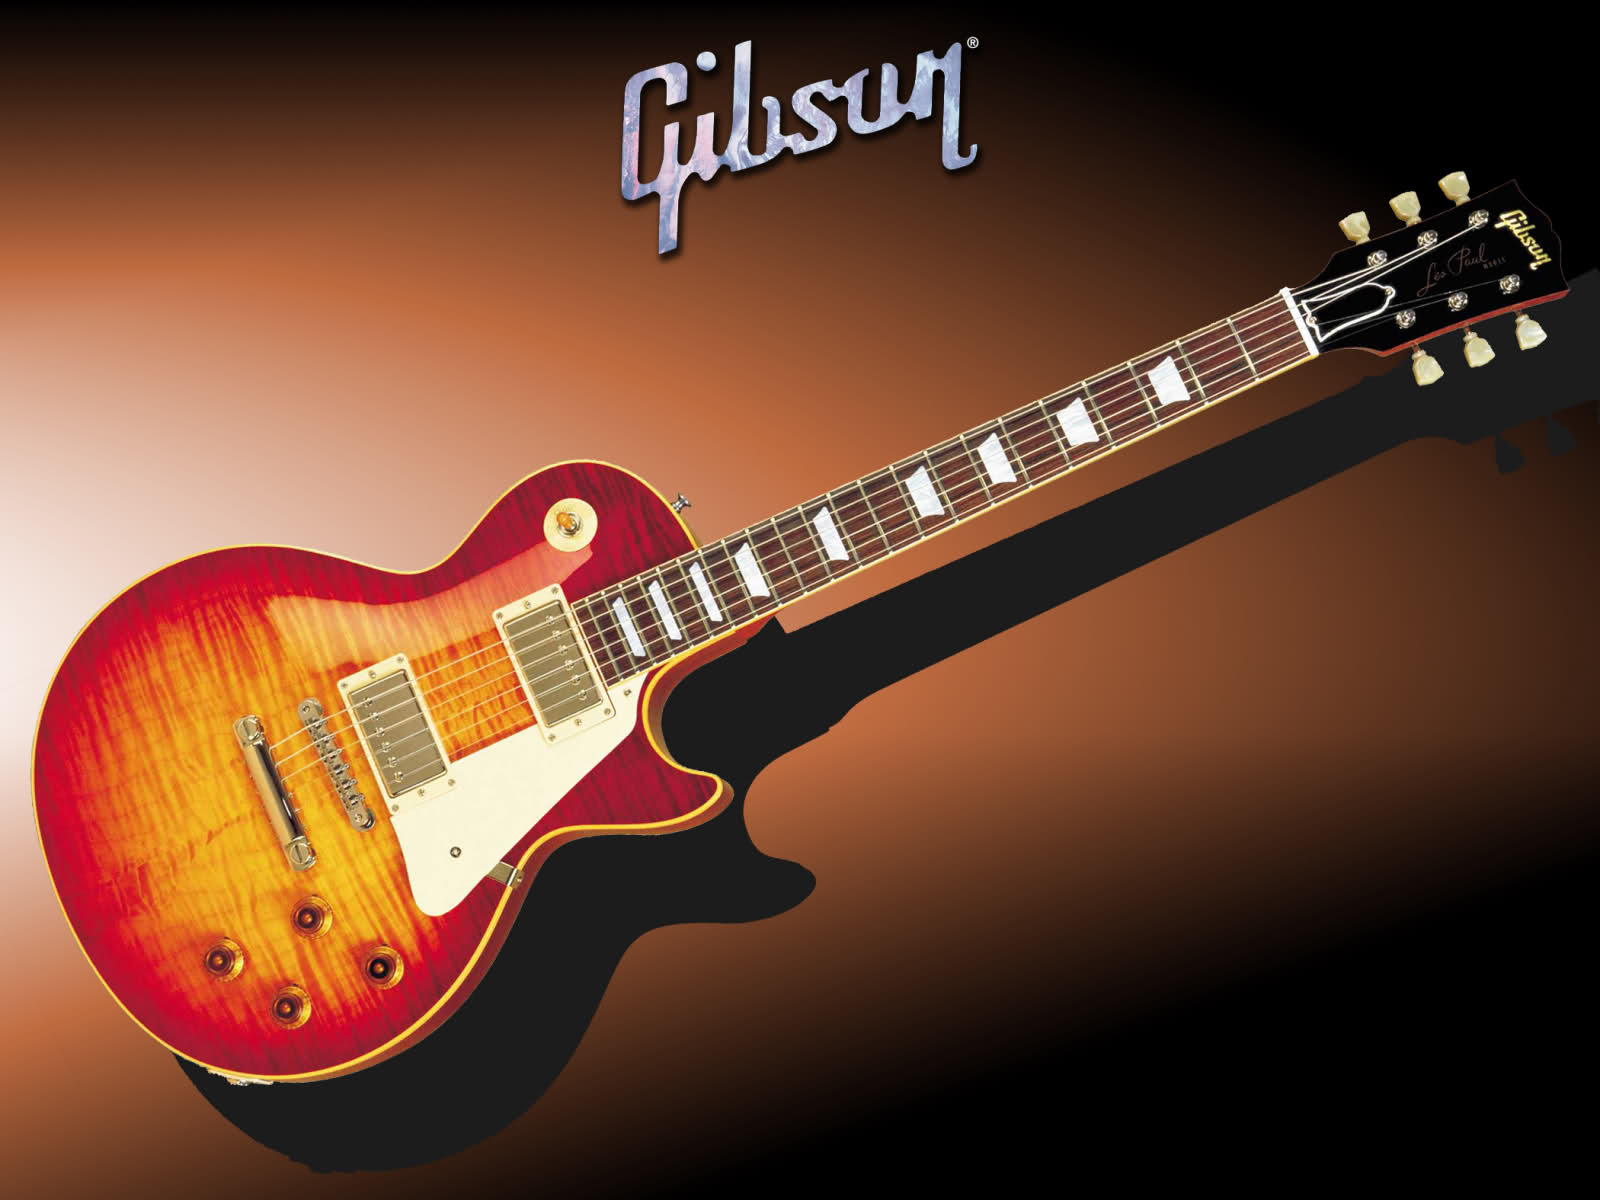 Gibson Guitar Wallpapers 9777 Hd Wallpapers in Music   Imagescicom